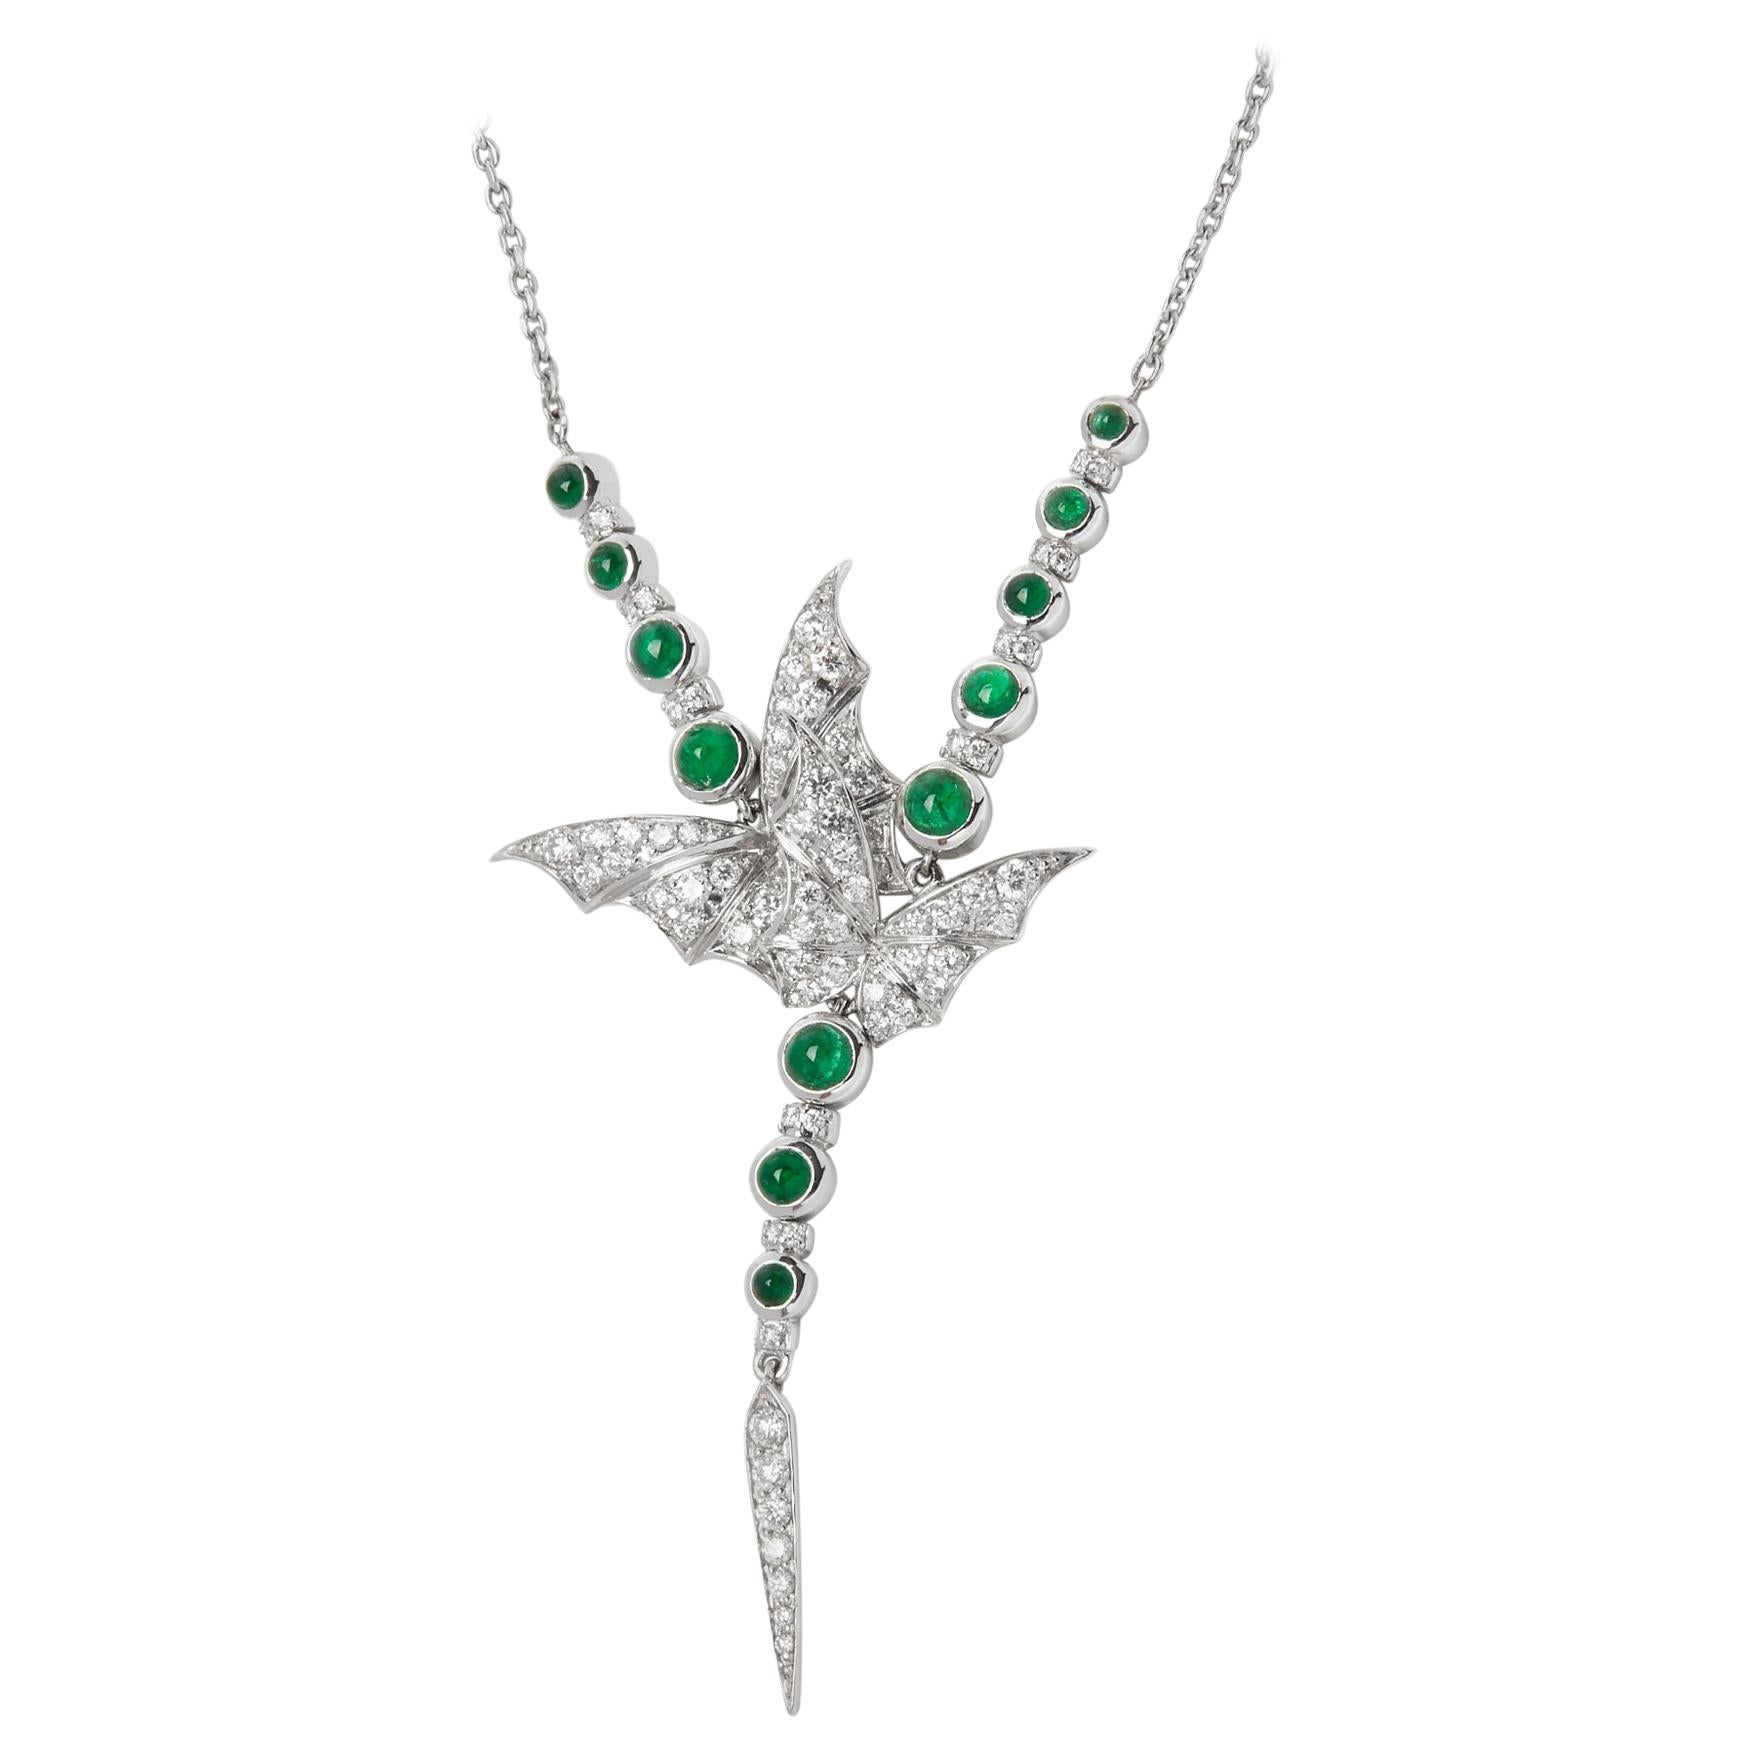 Stephen Webster Fly by Night 18 Carat Gold Diamond and Emerald Necklace